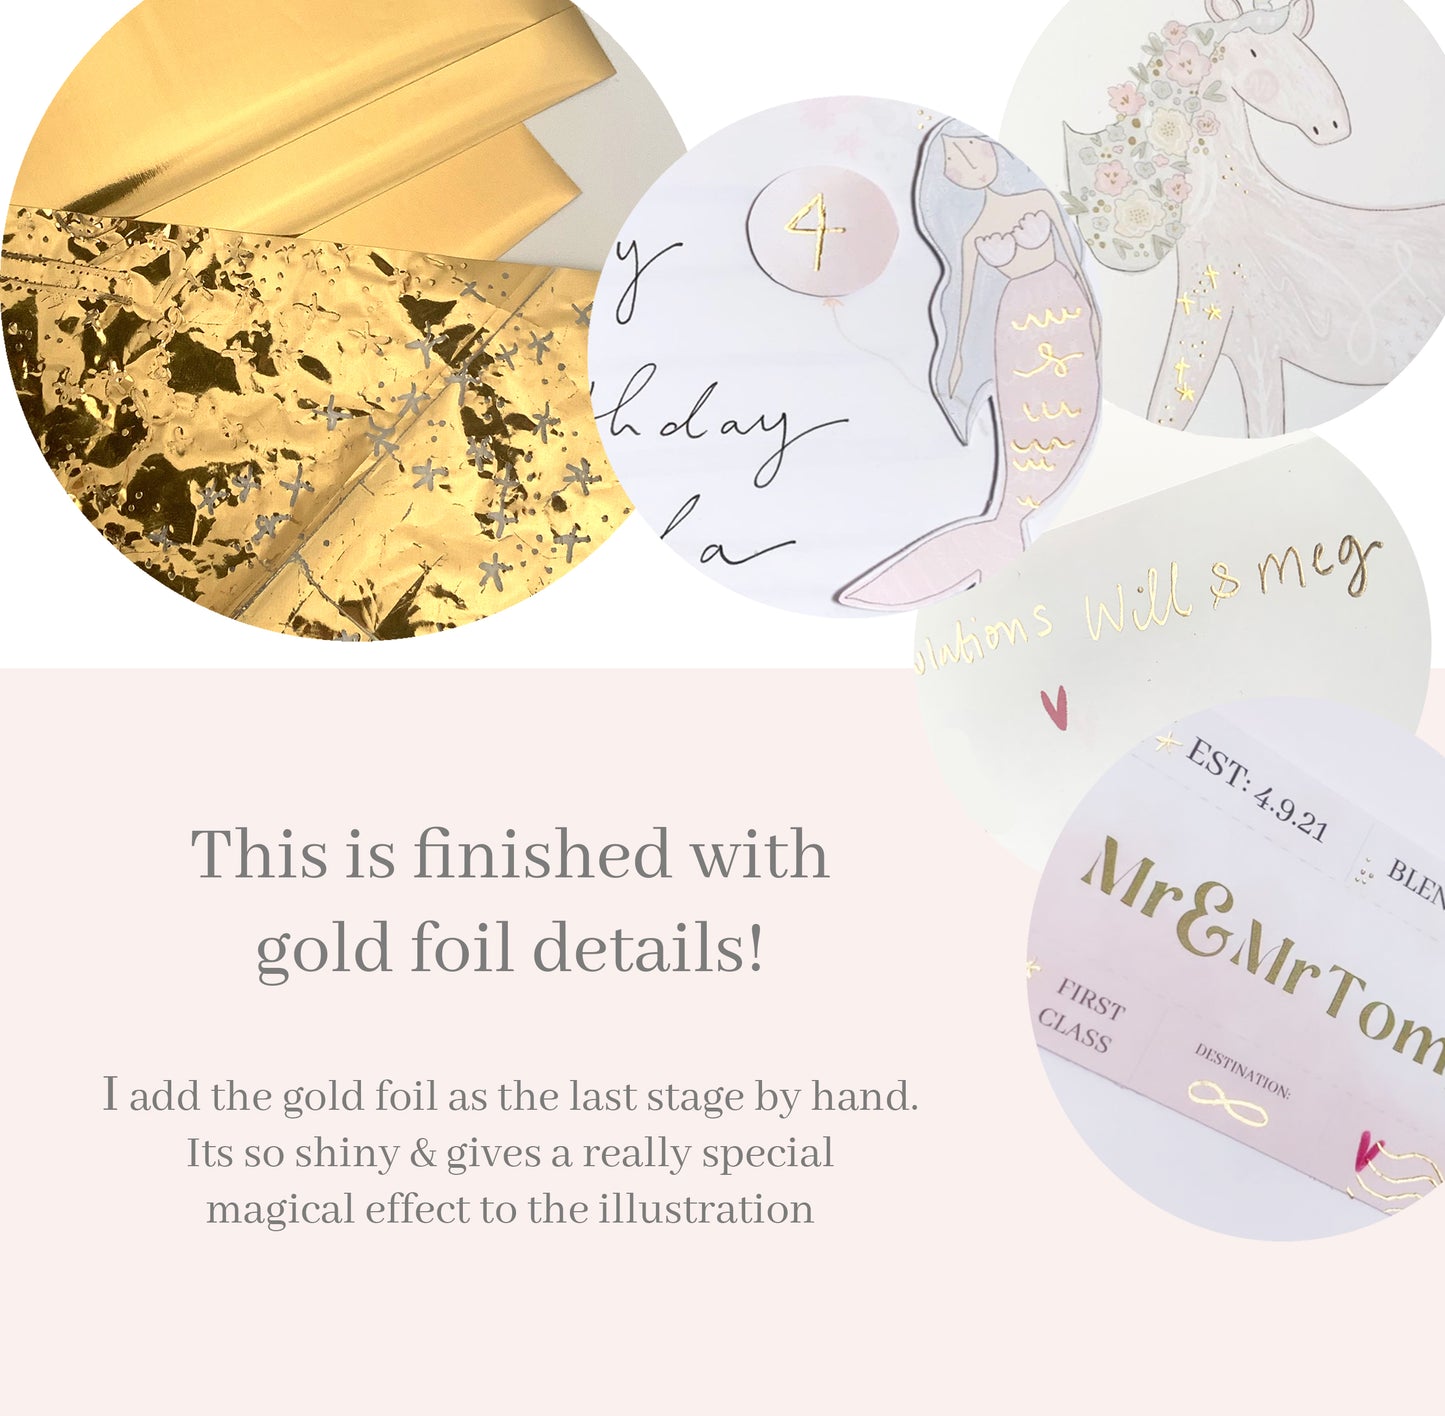 Make waves pastel mermaid print  - 3D mounted shell - gold foil under the sea fairytale print